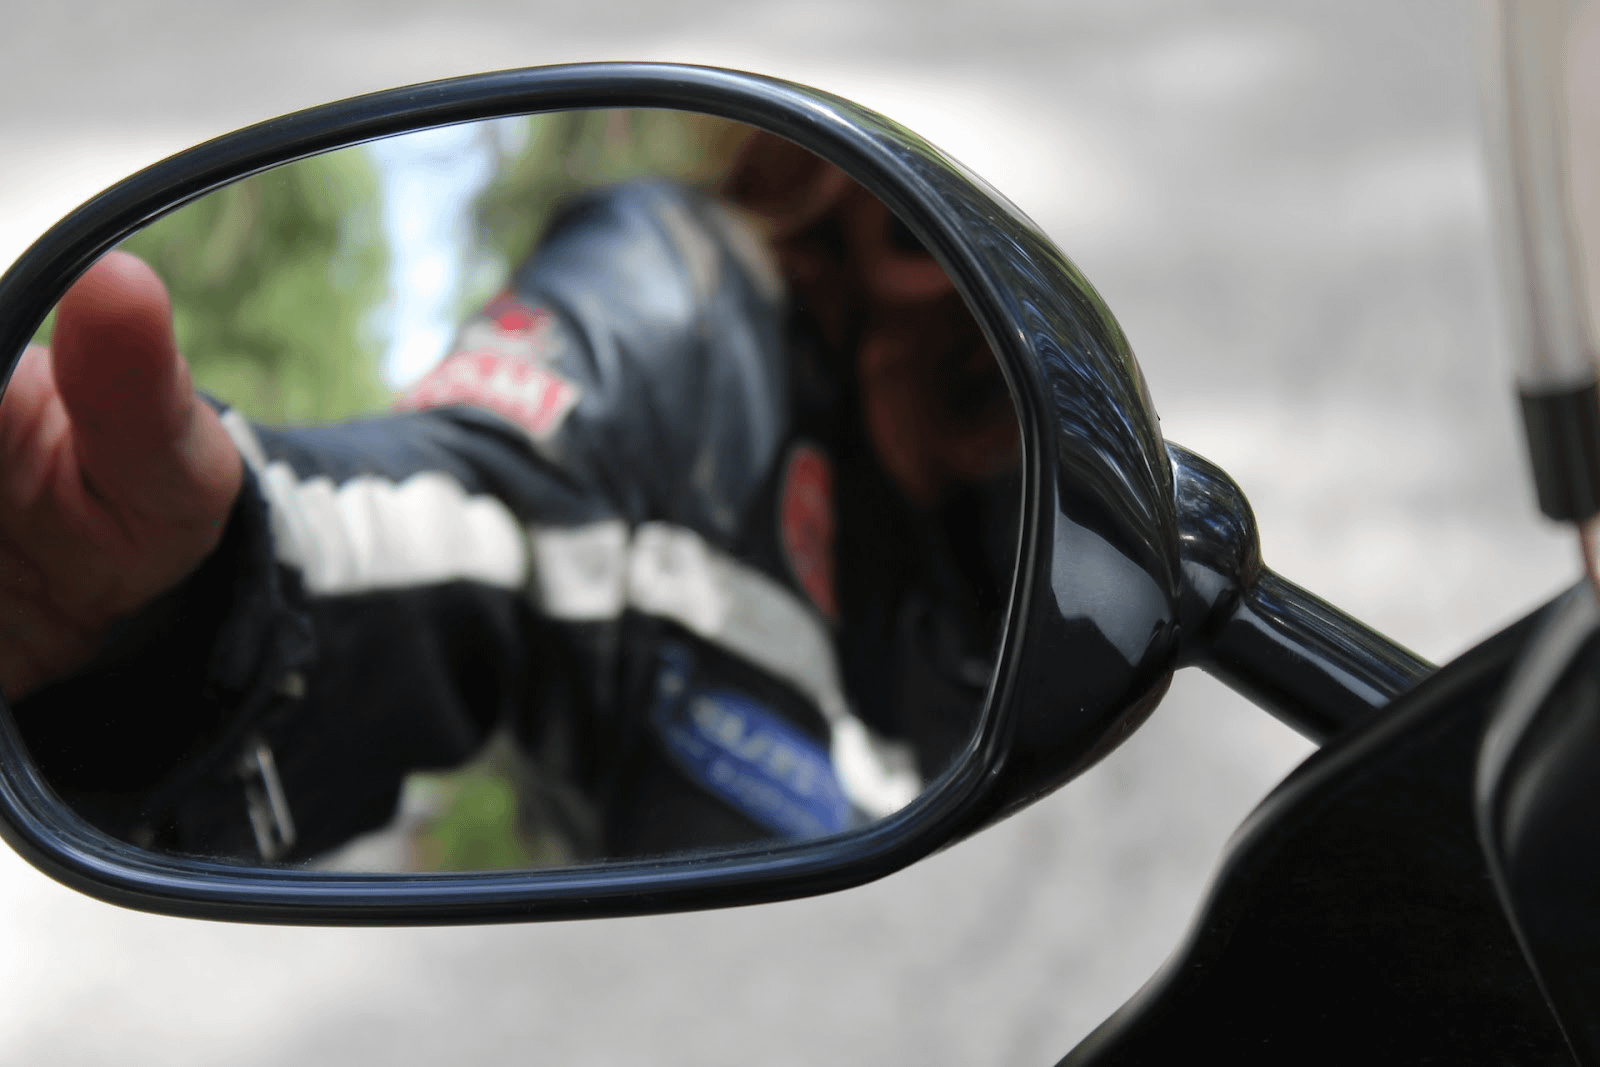 close up view of a rear view mirror on a motorbike